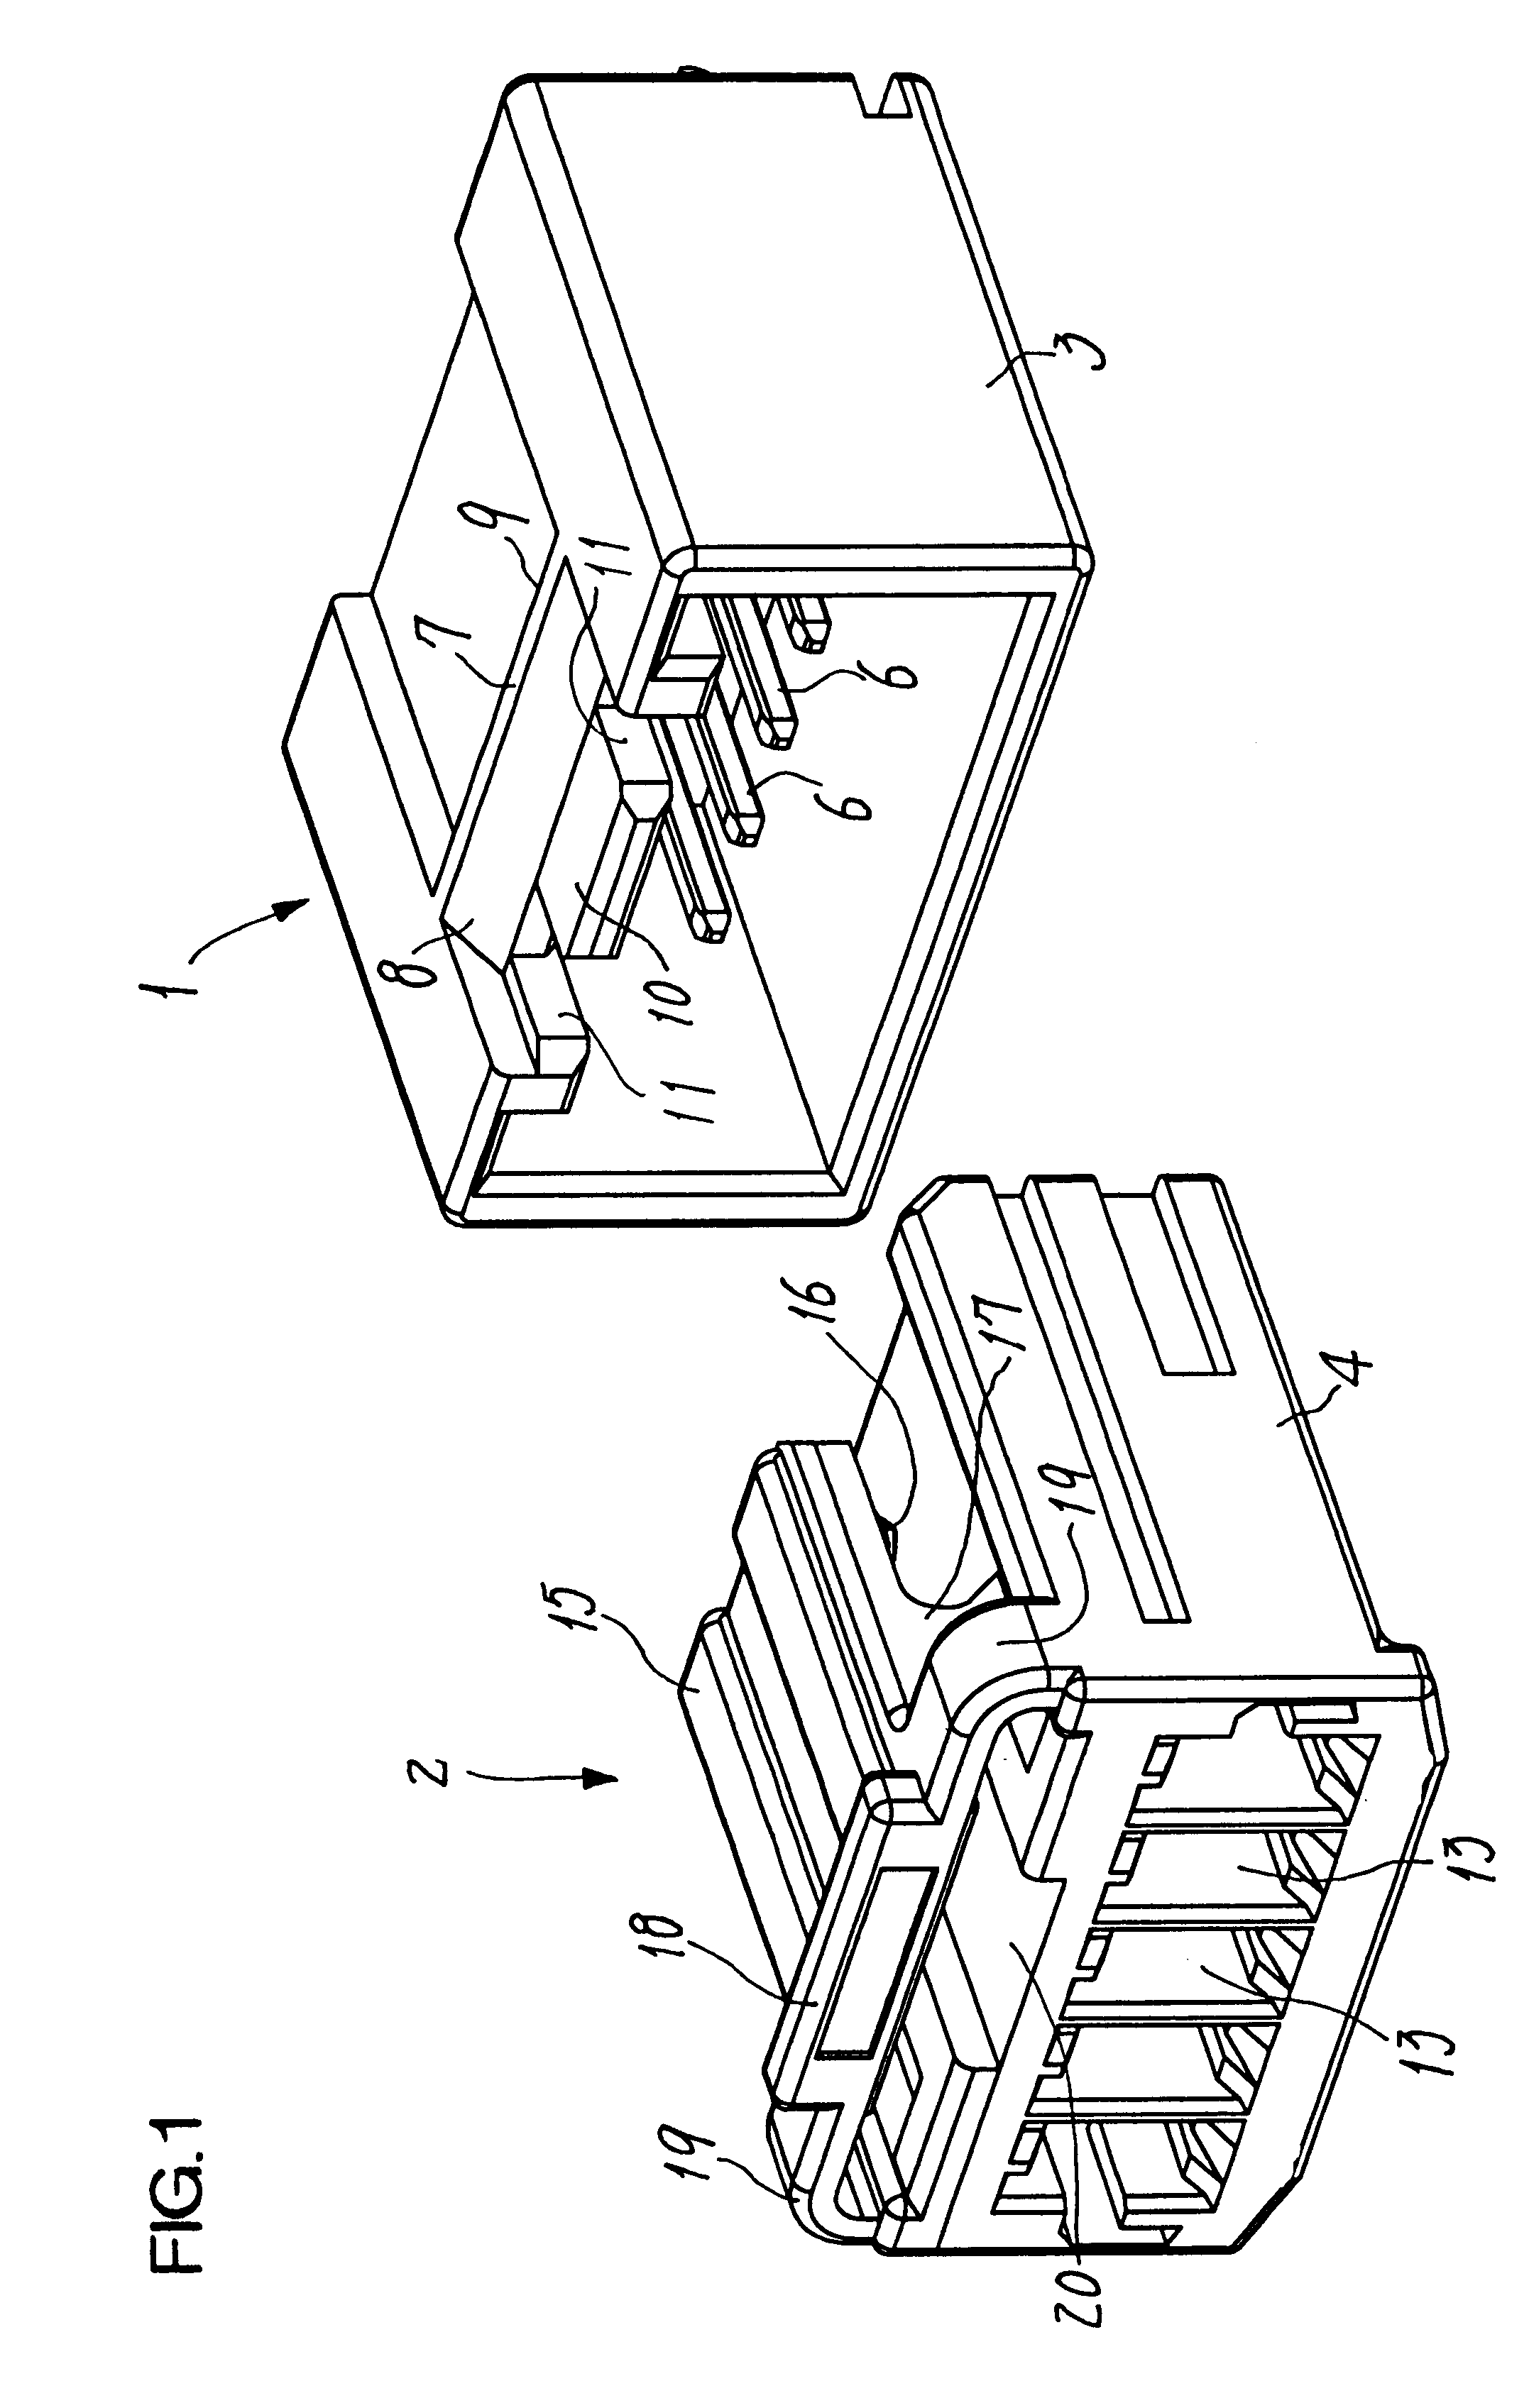 Connector assembly having an interlocking system